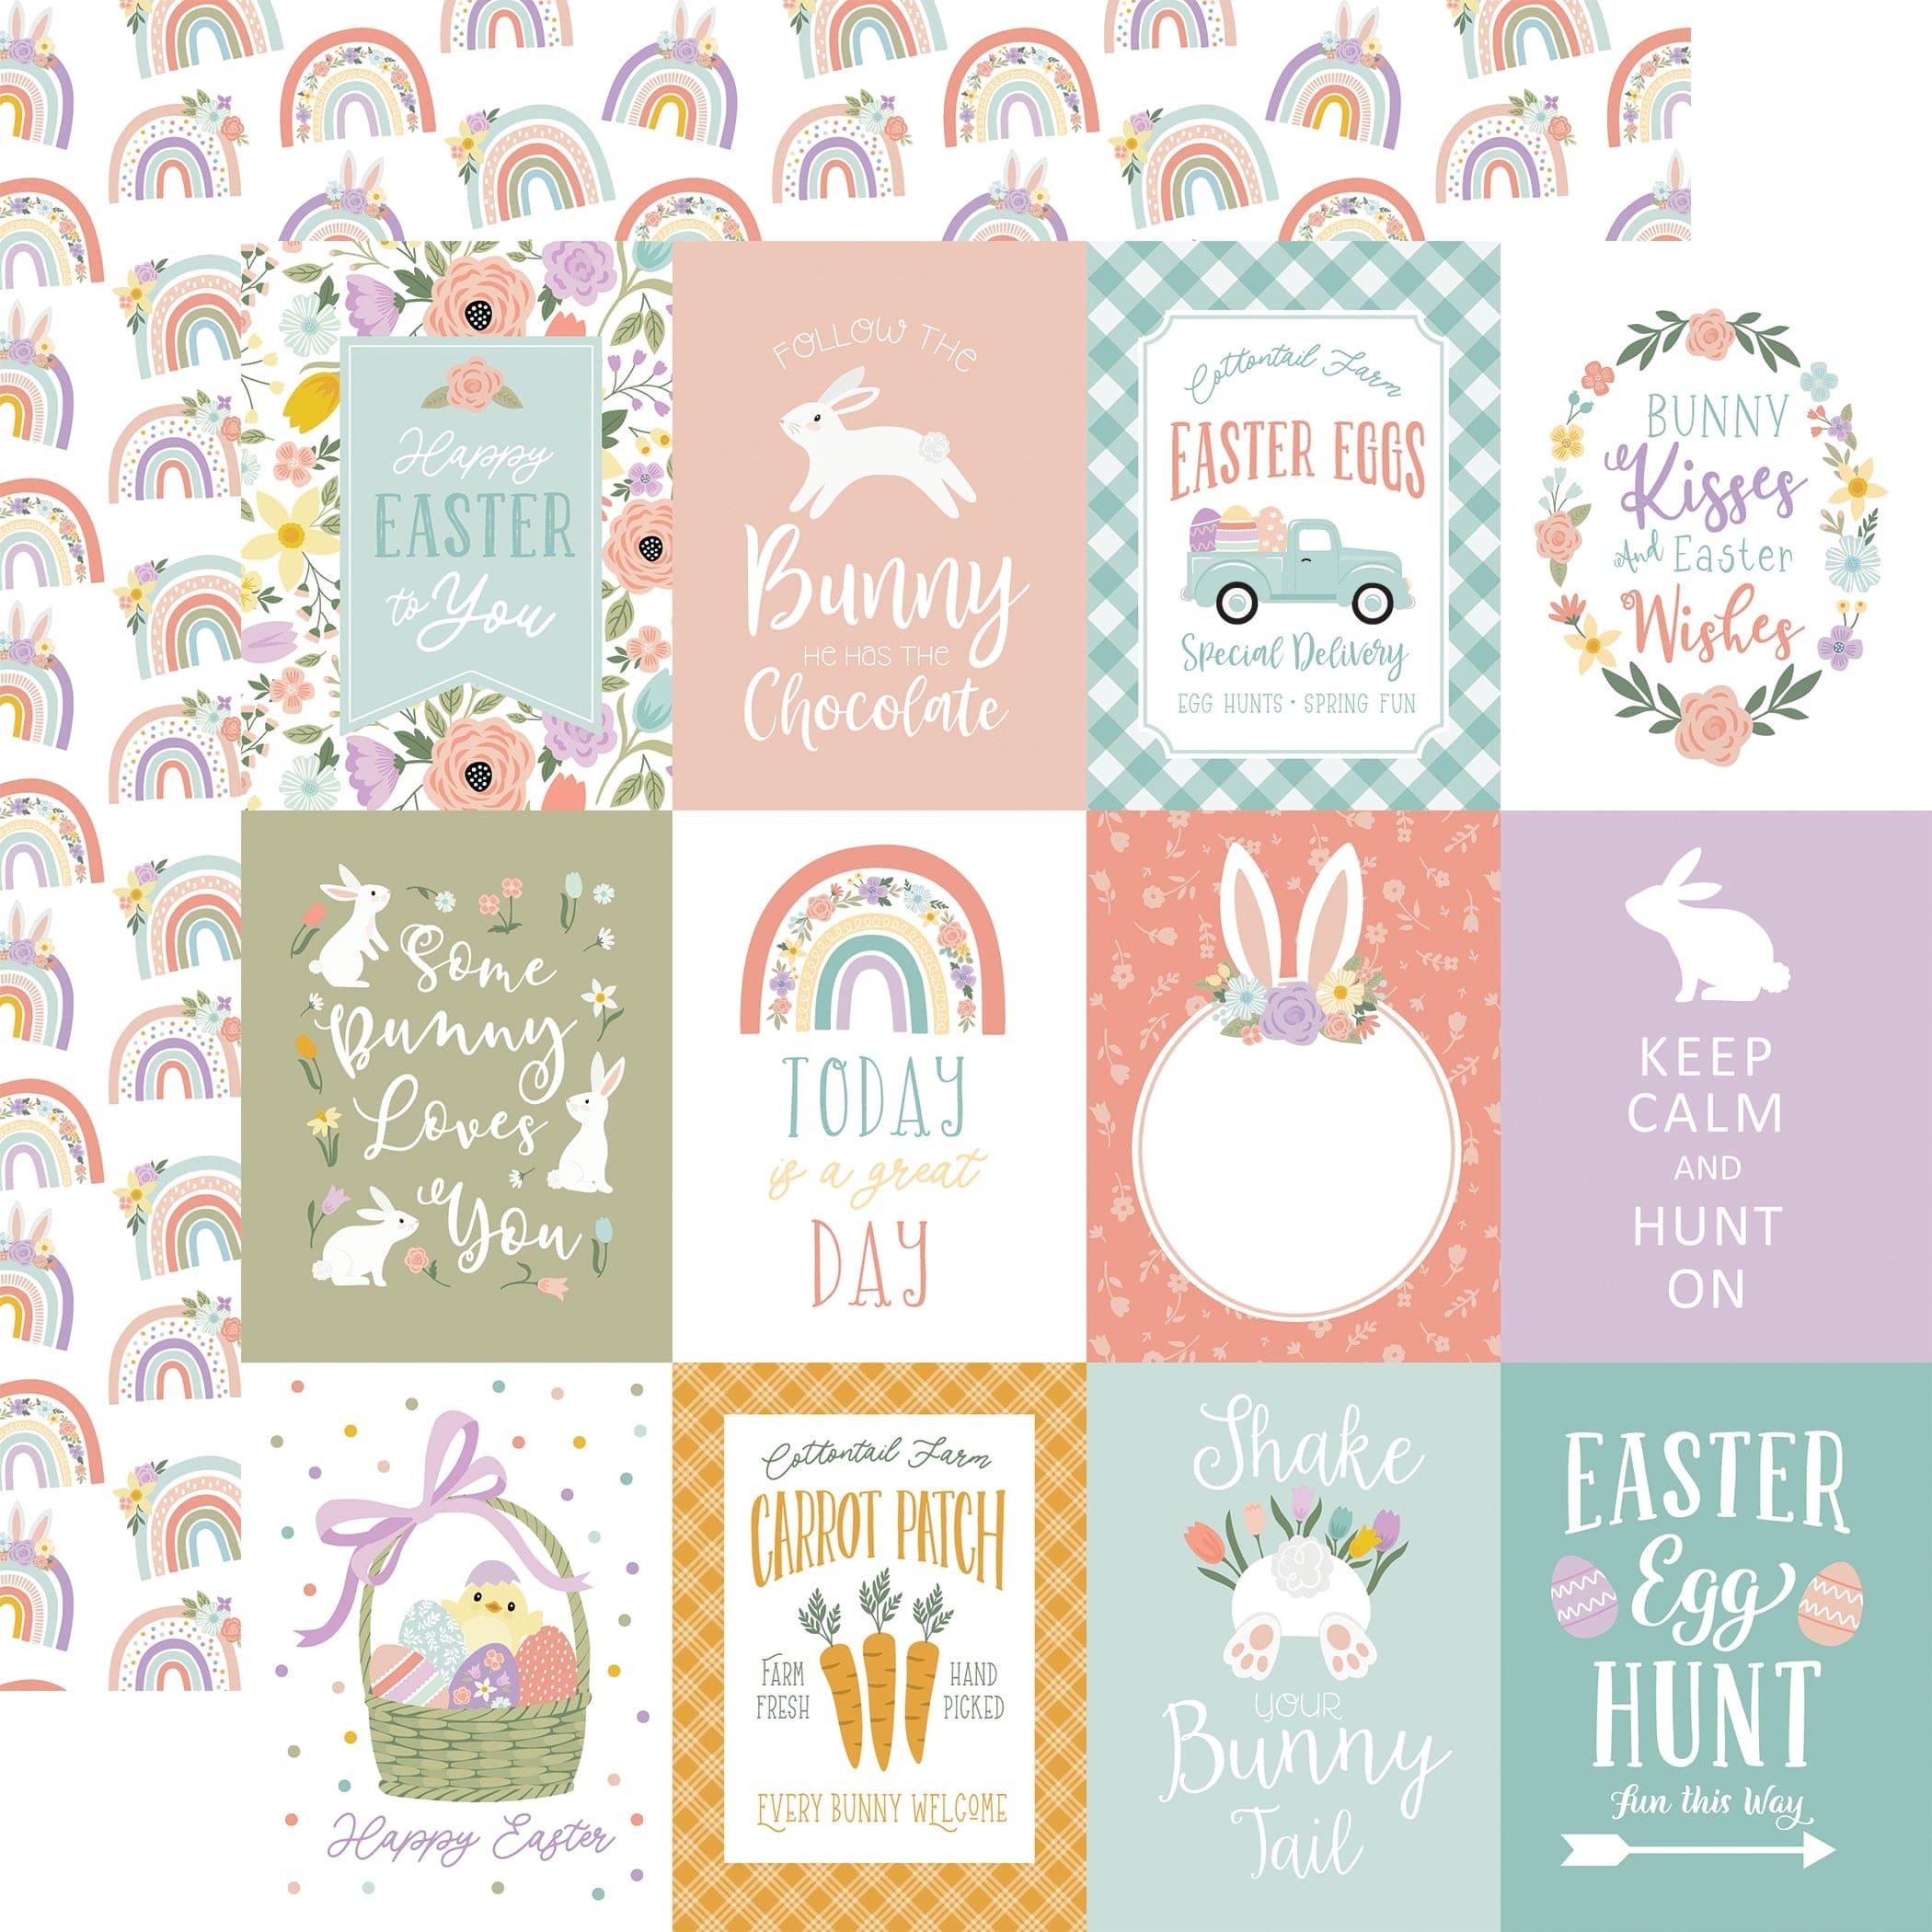 It's Easter Time Collection 3 x 4 Journaling Cards 12 x 12 Double-Sided Scrapbook Paper by Echo Park Paper - Scrapbook Supply Companies